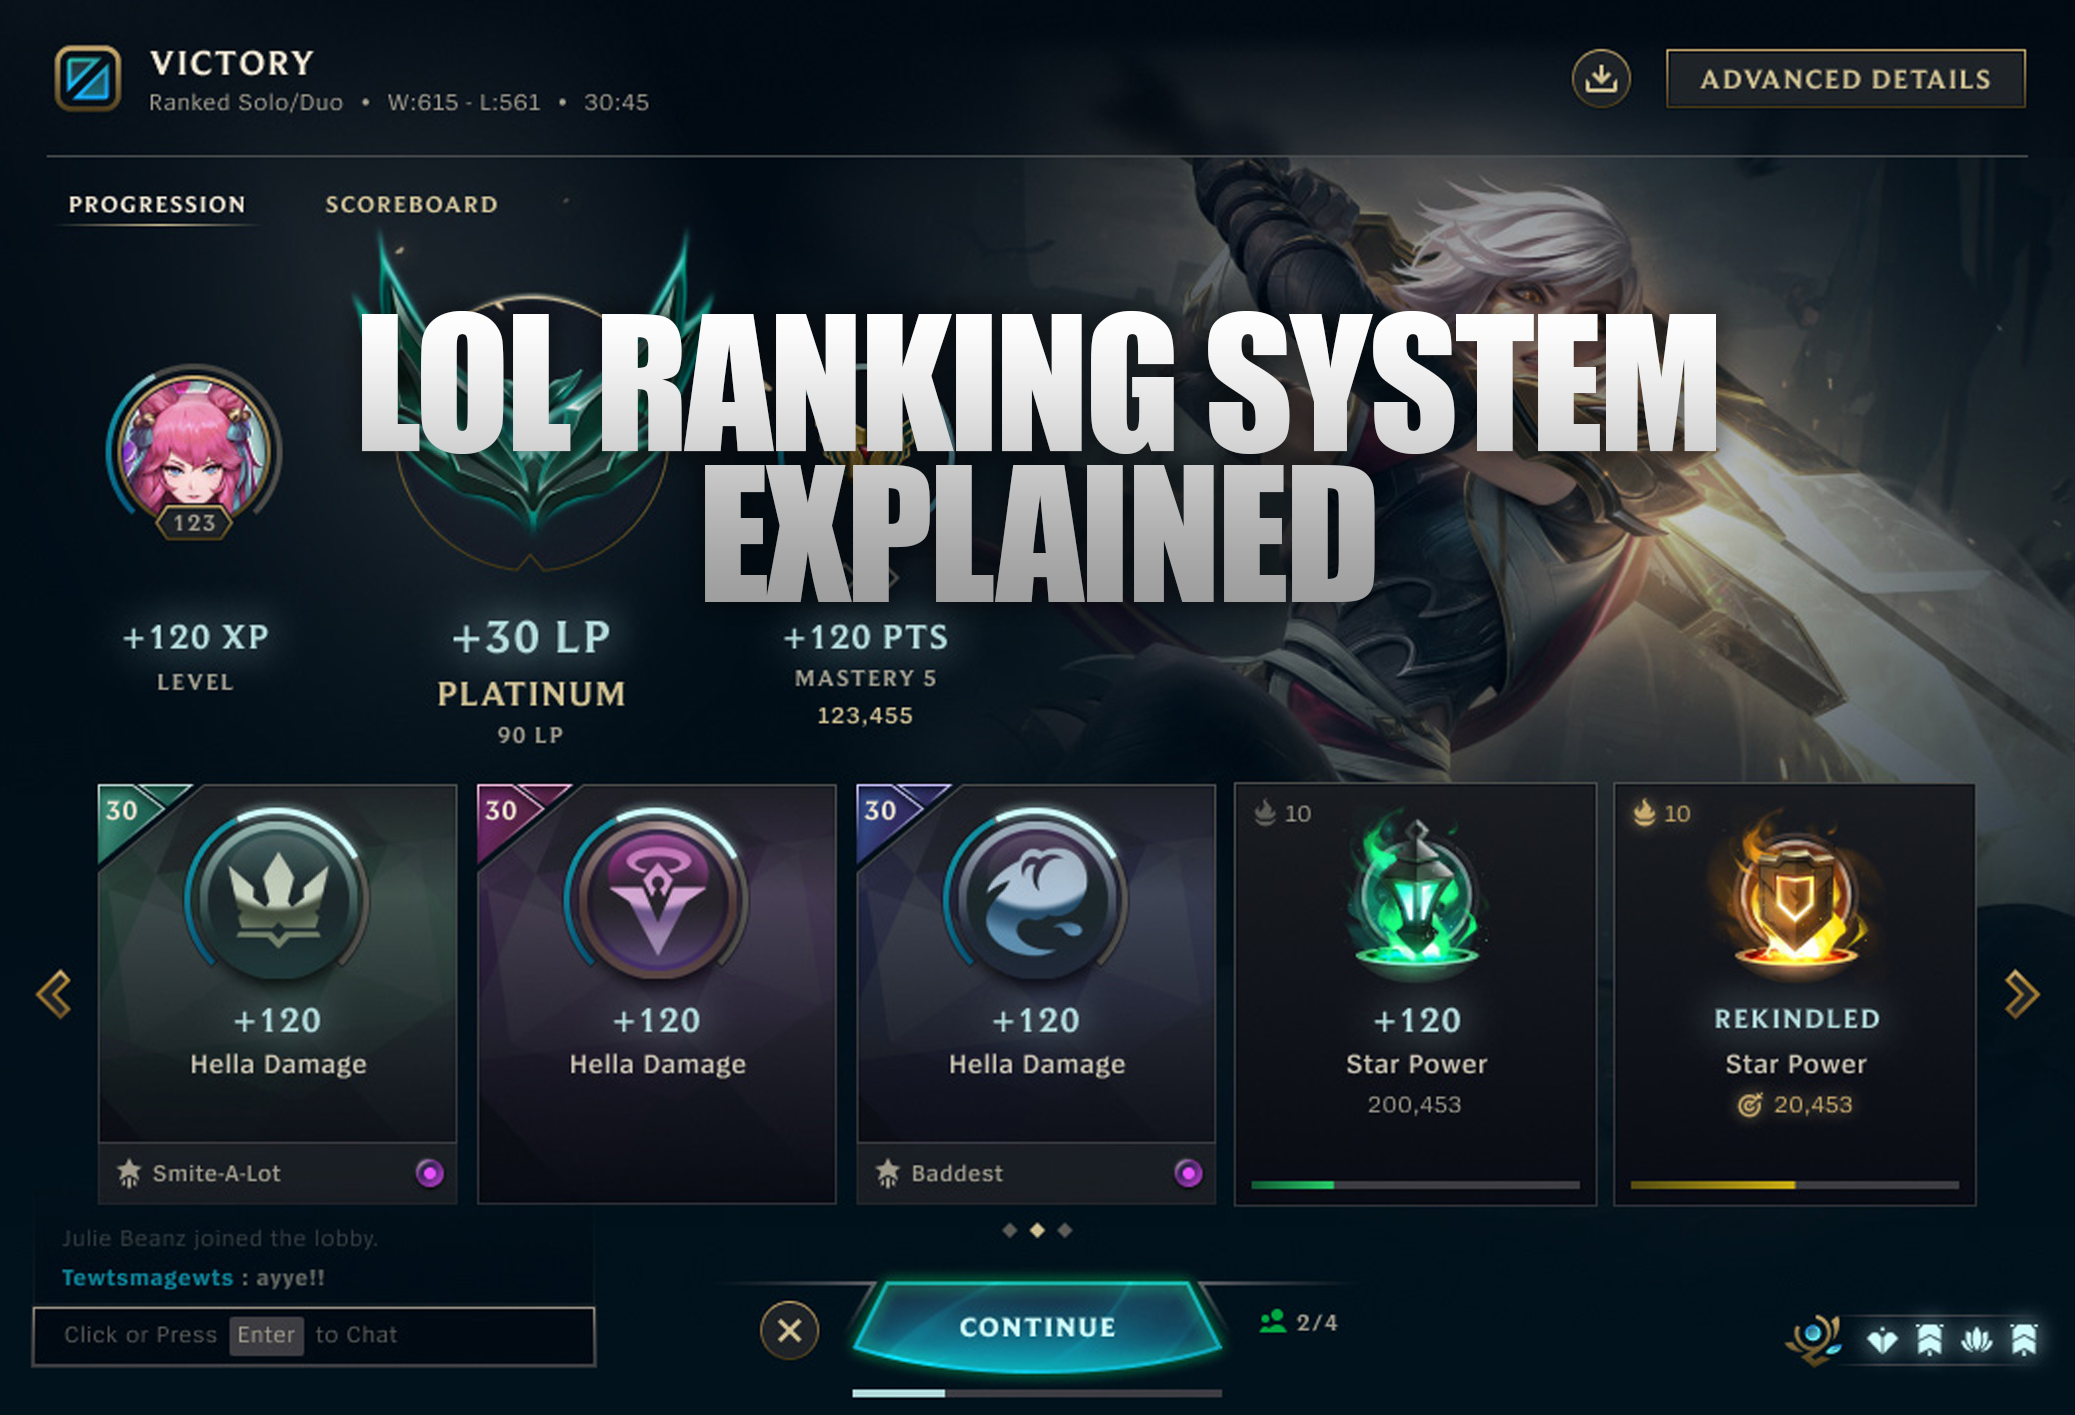 The League of Legends Ranking System uses a hidden Matchmaking Rating (MMR) to determine your skill level and match you with players of similar ability. Though your exact MMR is kept secret, the results of it are reflected in your rank, tier, division, and League Points (LP).